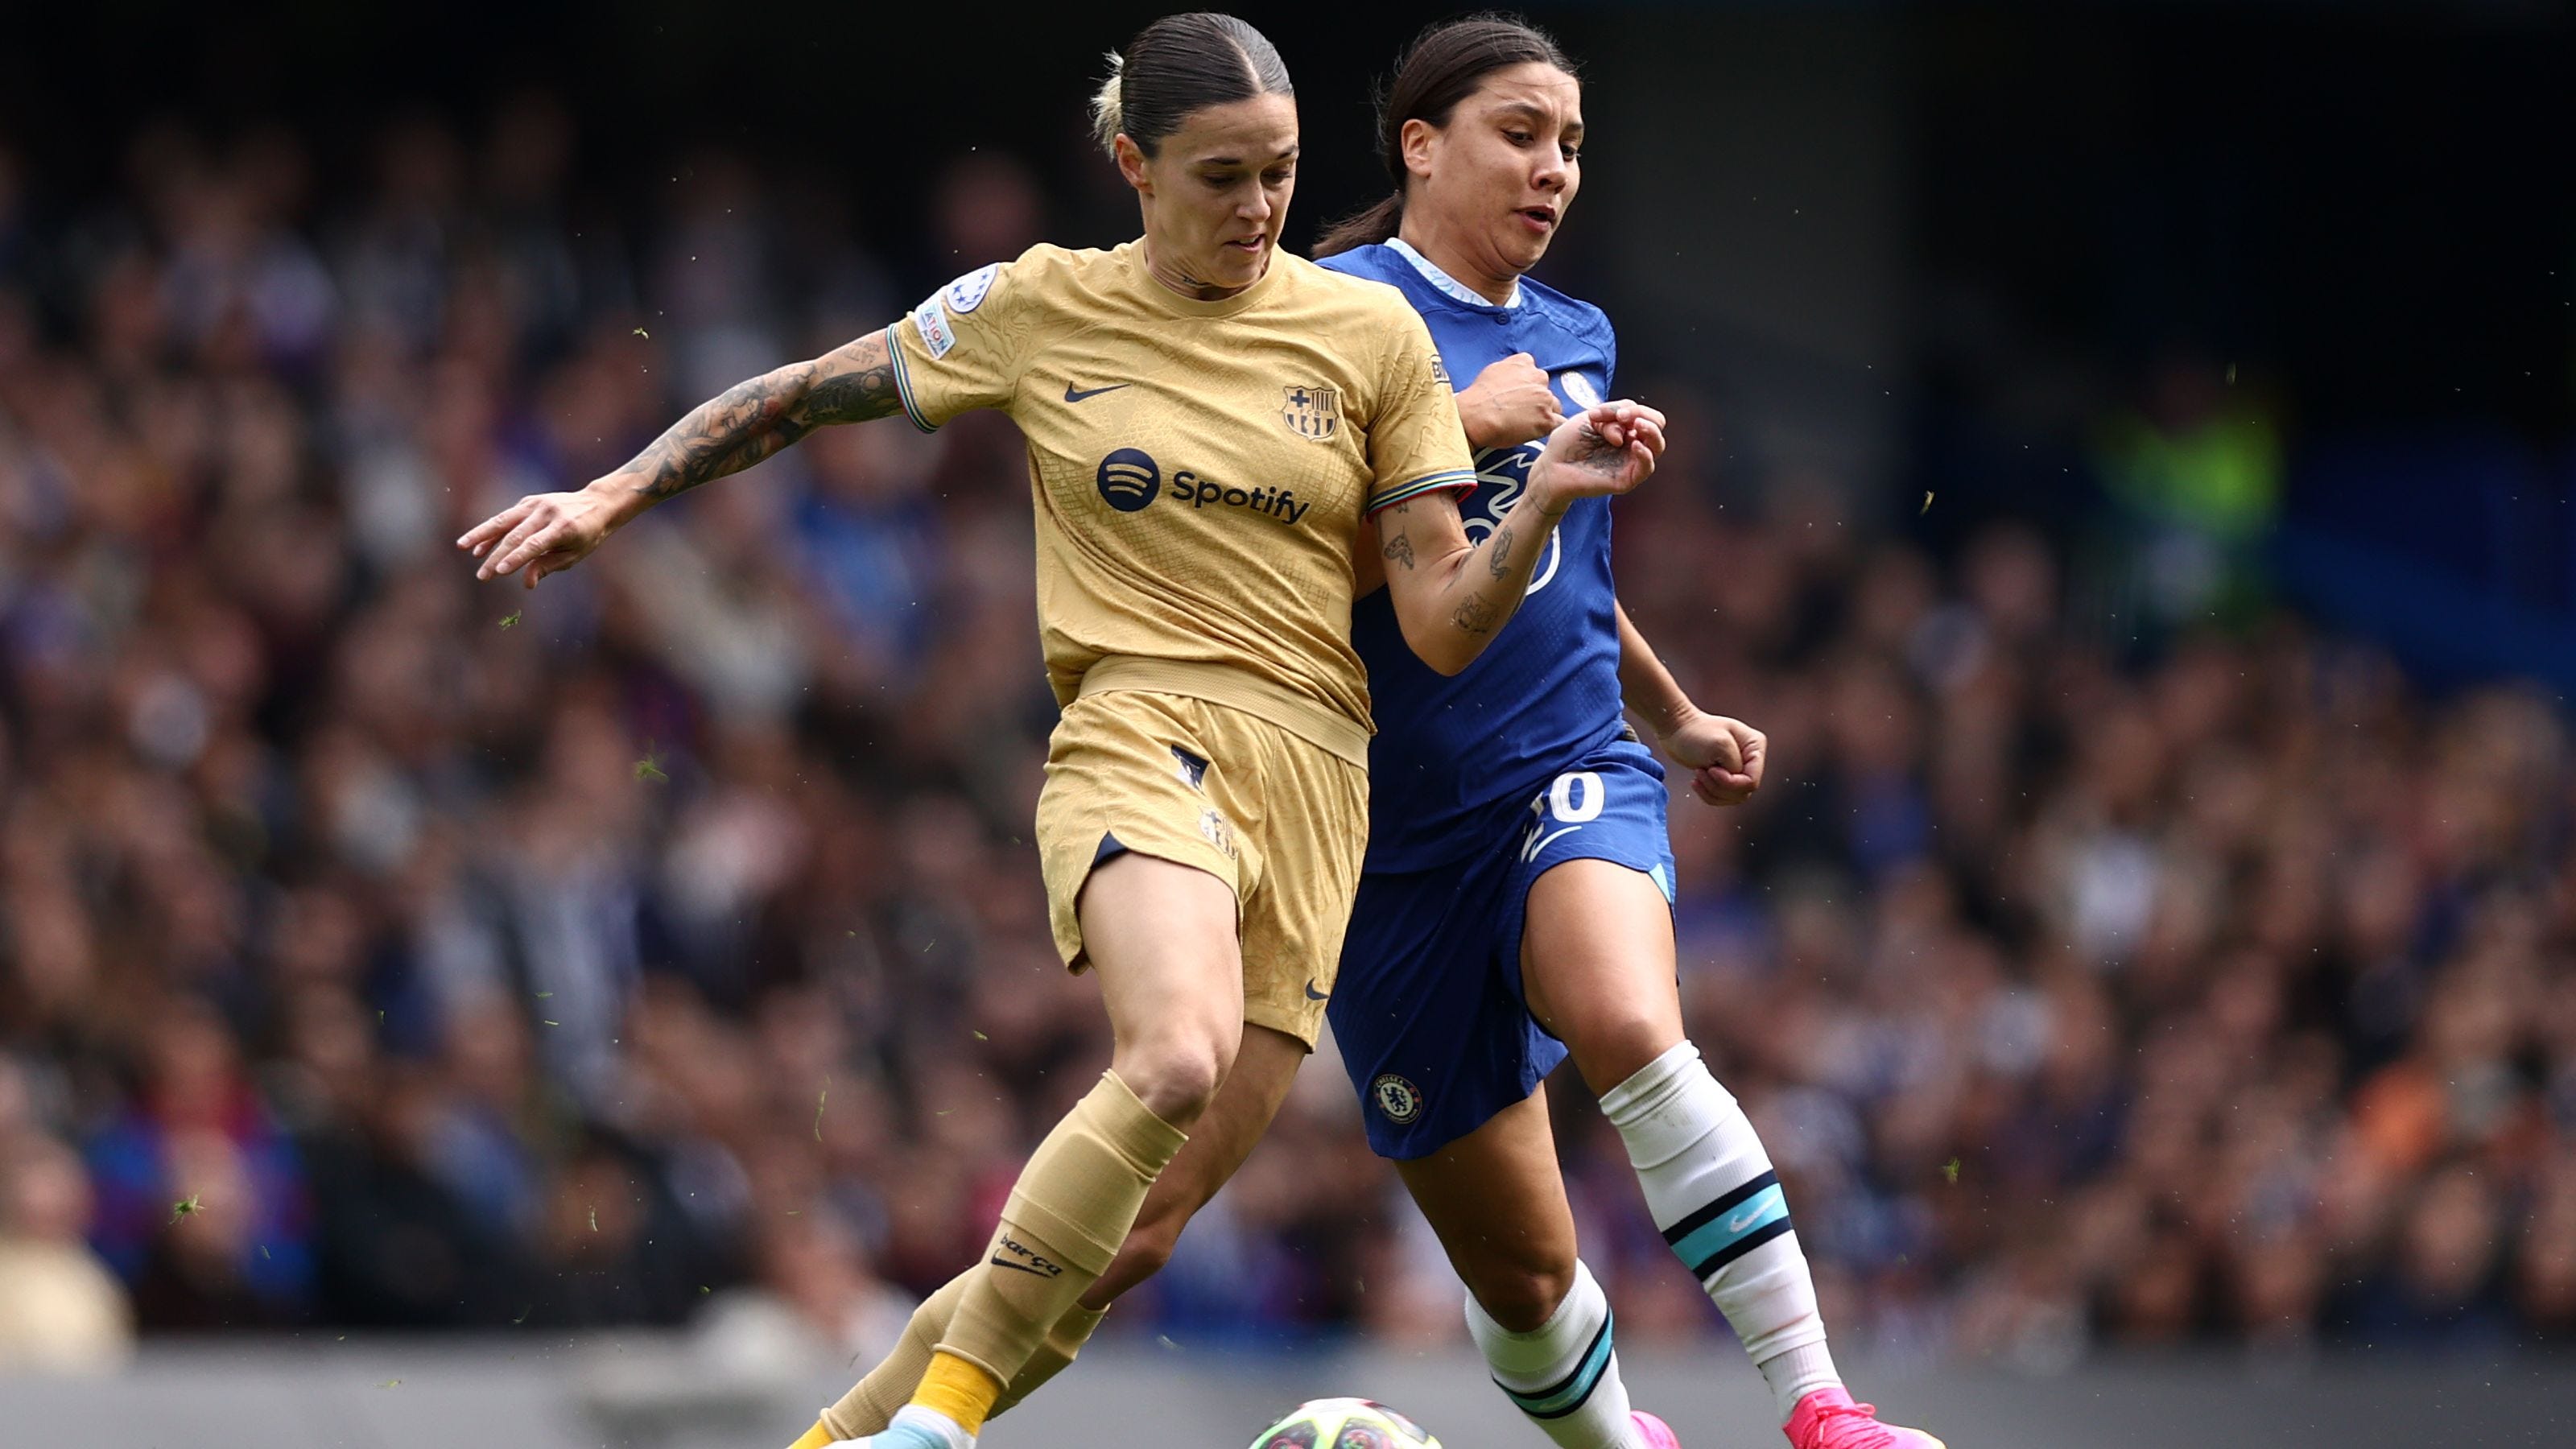 Barcelona Femeni vs Chelsea Women Where to watch UWCL semi-final online, live stream, TV channels and kick-off time Goal US